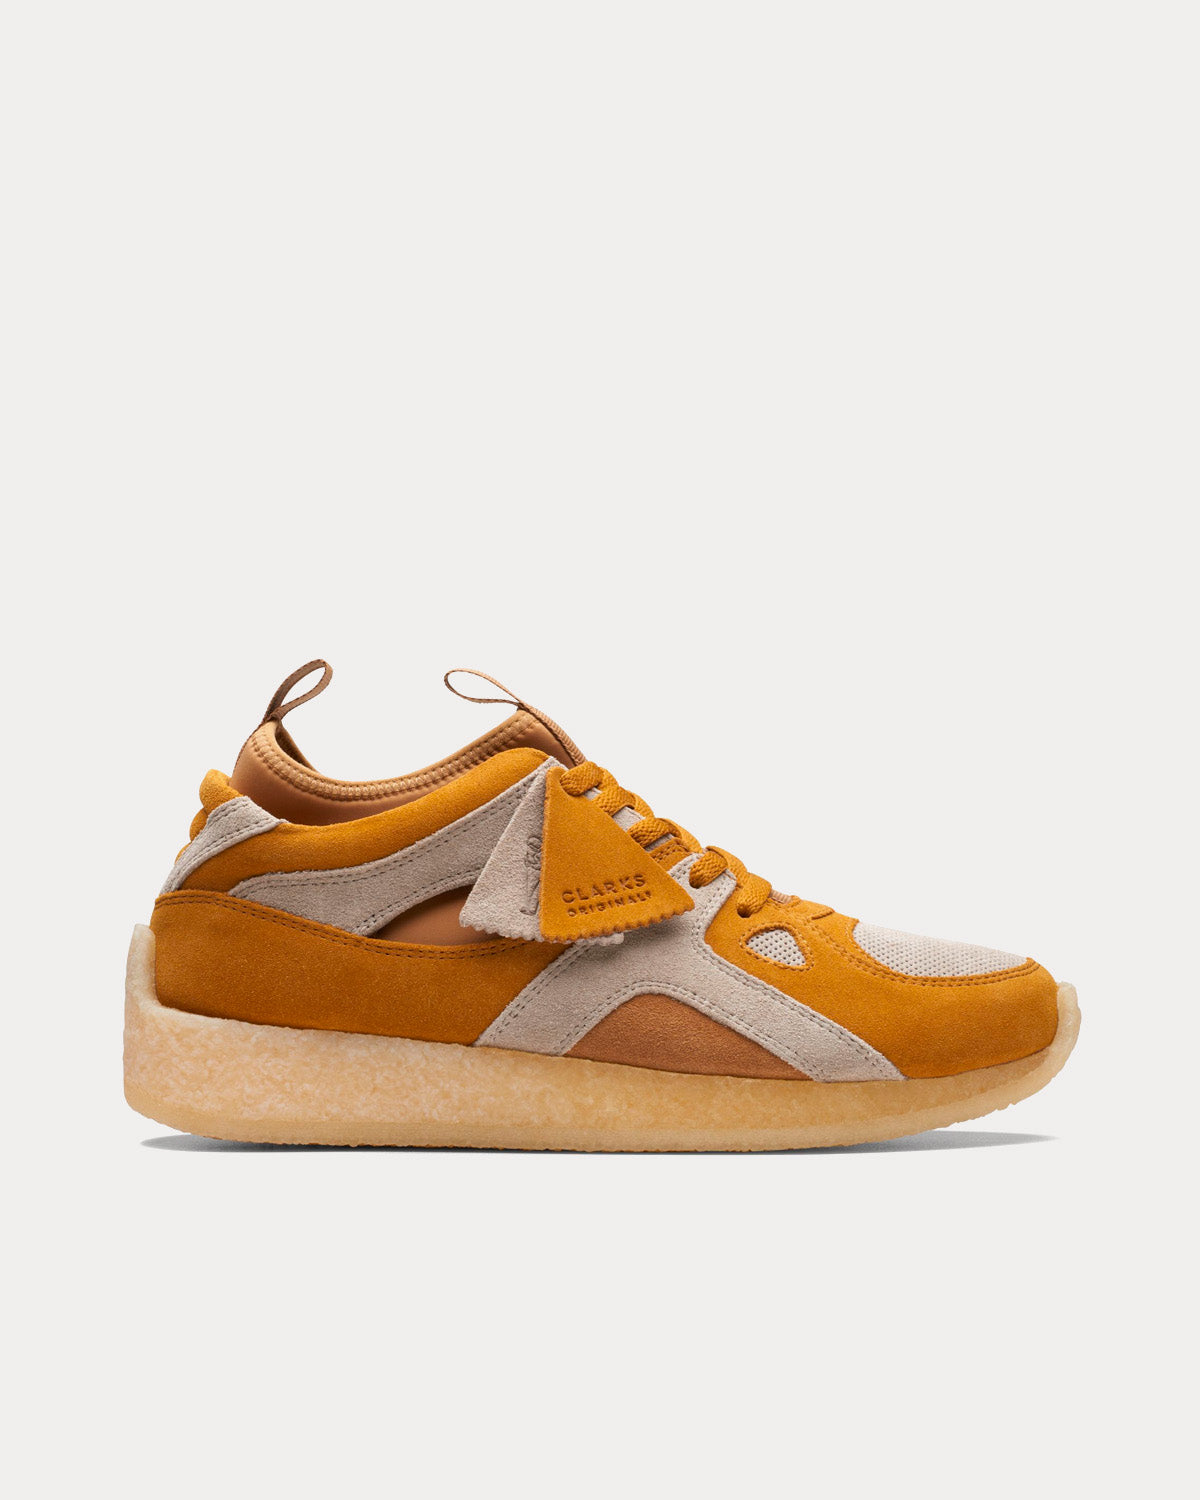 Clarks x Kith - 8th St Breacon Light Brown Low Top Sneakers